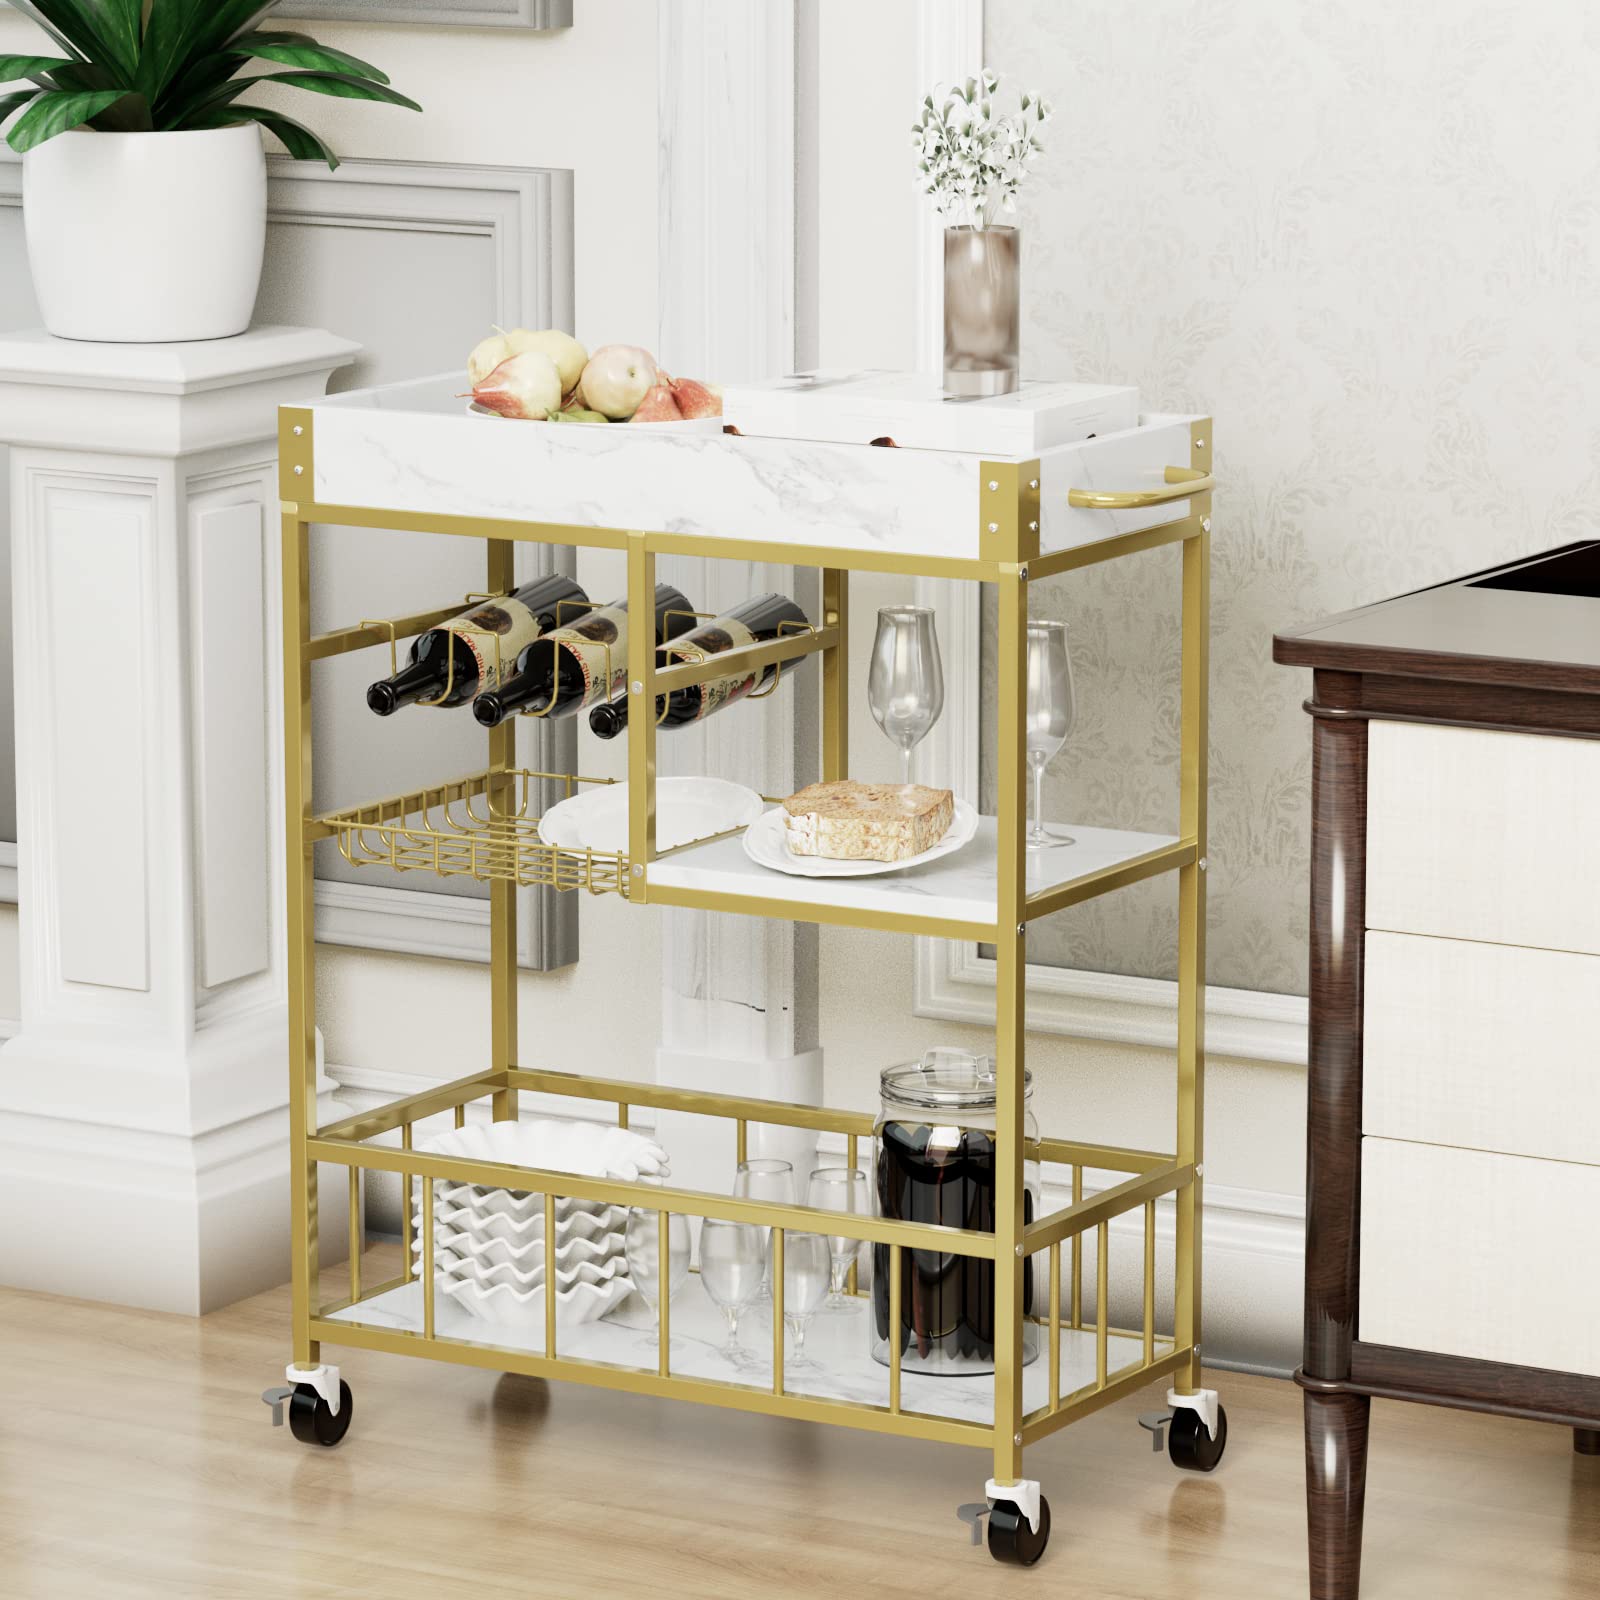 Azheruol Bar Cart 3 Tiers Removable Storage Tray with Wine Rack & Basket Tier,Rolling Beverage Cart,Mobile Bar Serving Cart with Handle, White Marble Wood and Gold Frame Home Kitchen Shelf for Party